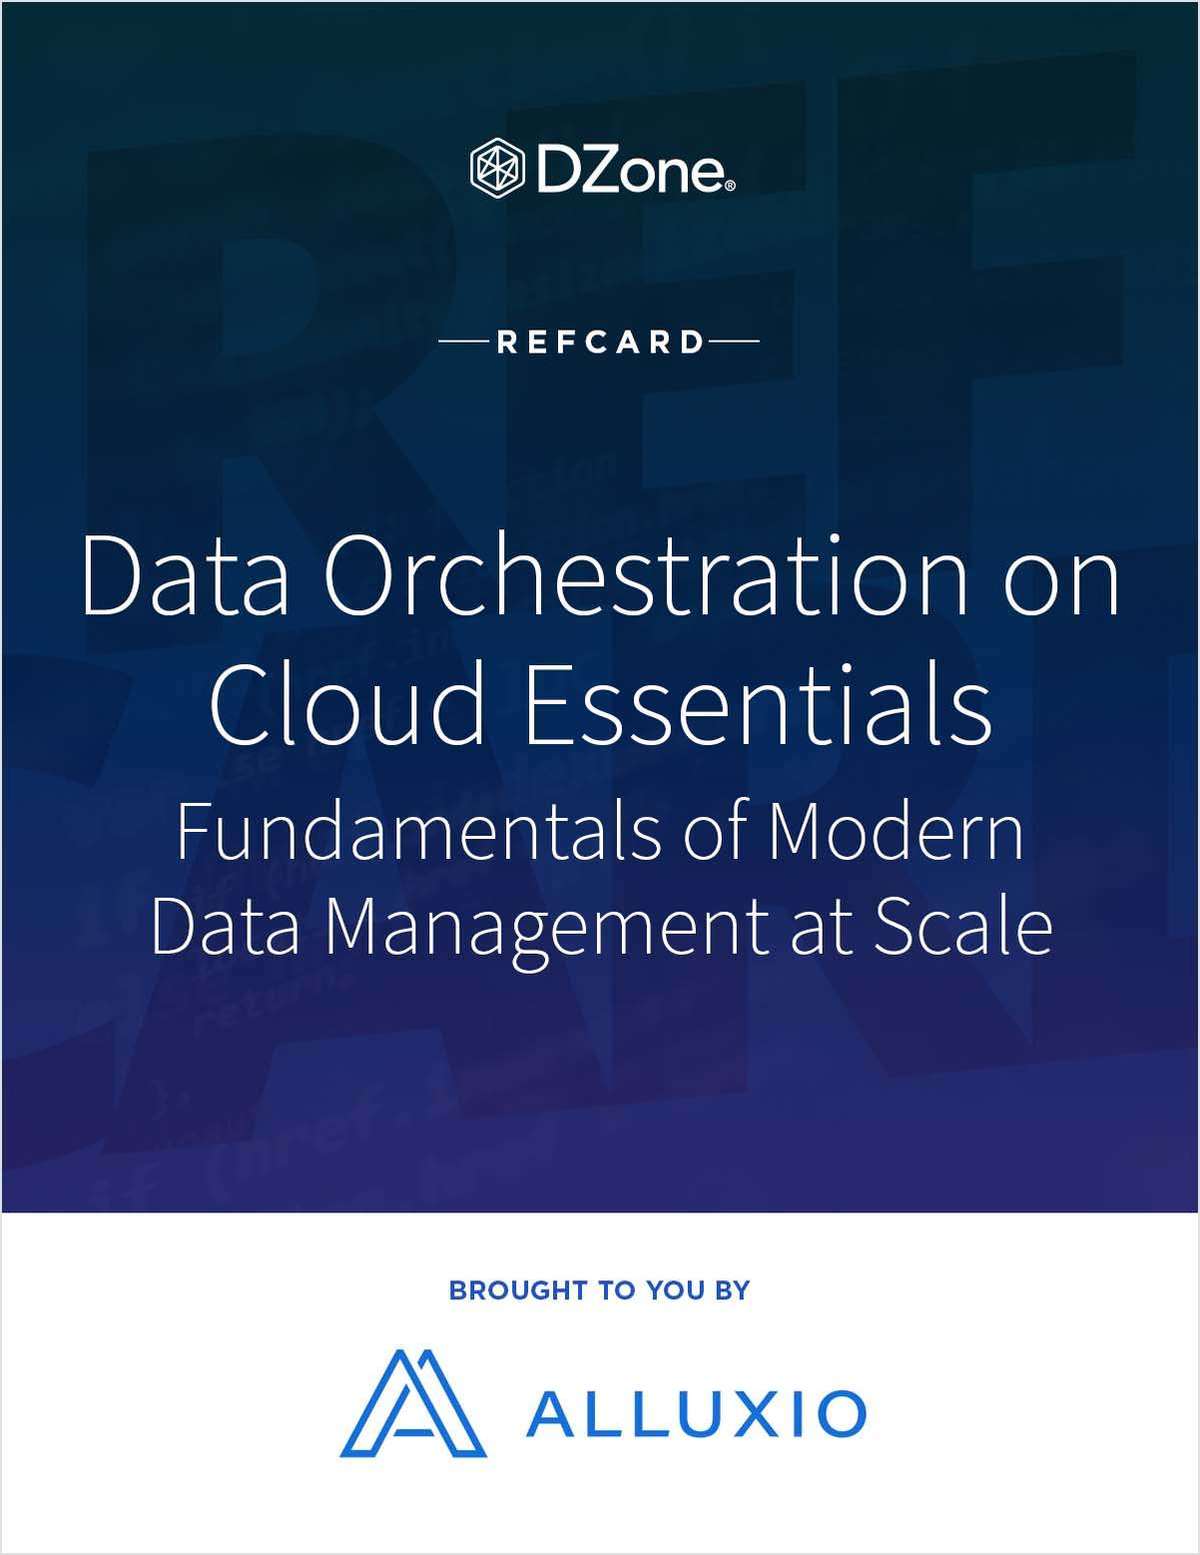 Data Orchestration on Cloud Essentials